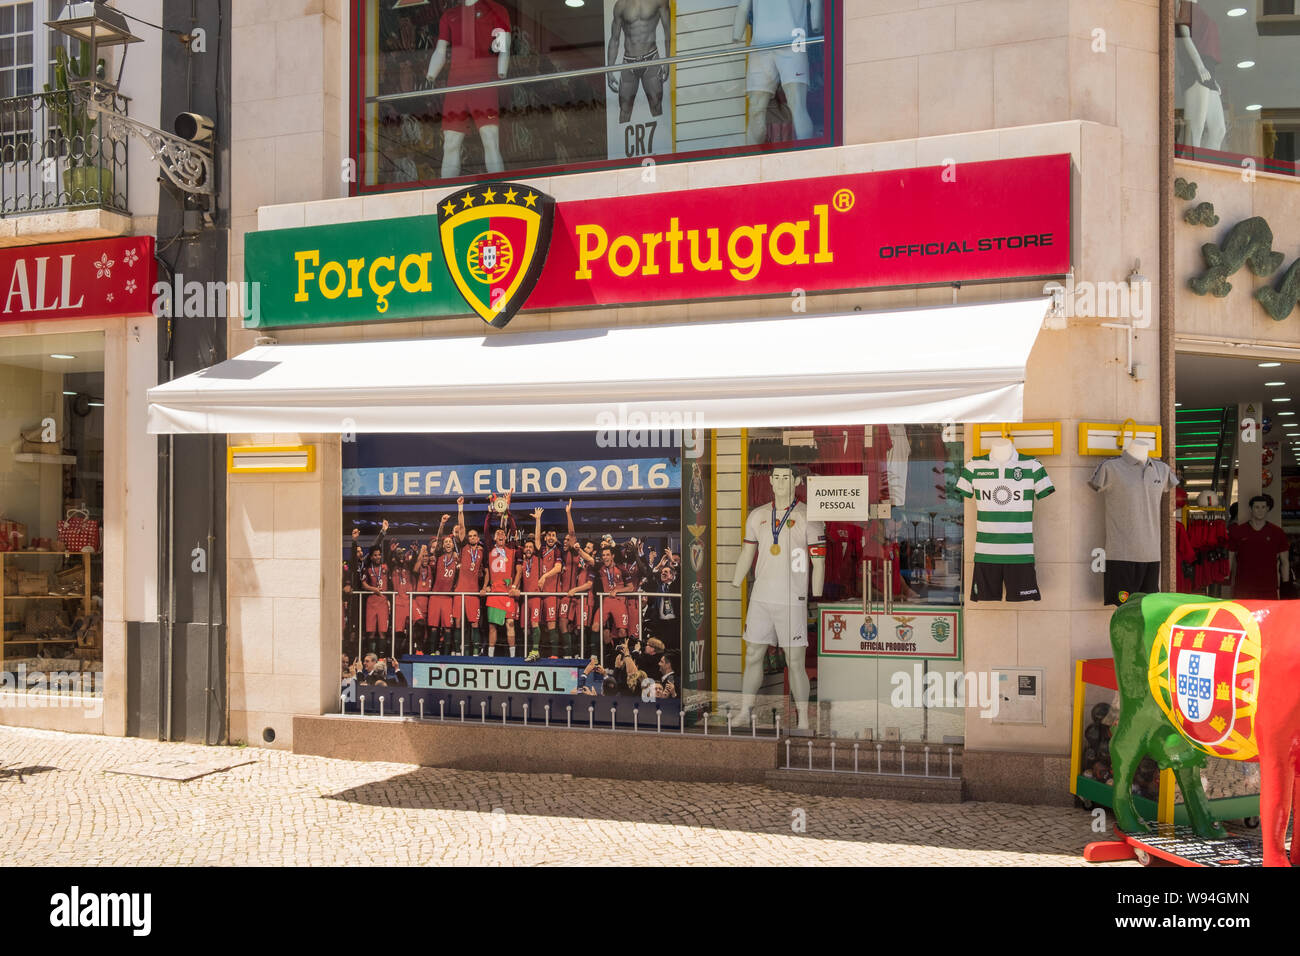 Forca Portugal shop selling Portugal national football team memorabilia and kit in the Algarve town of Lagos in Portugal Stock Photo